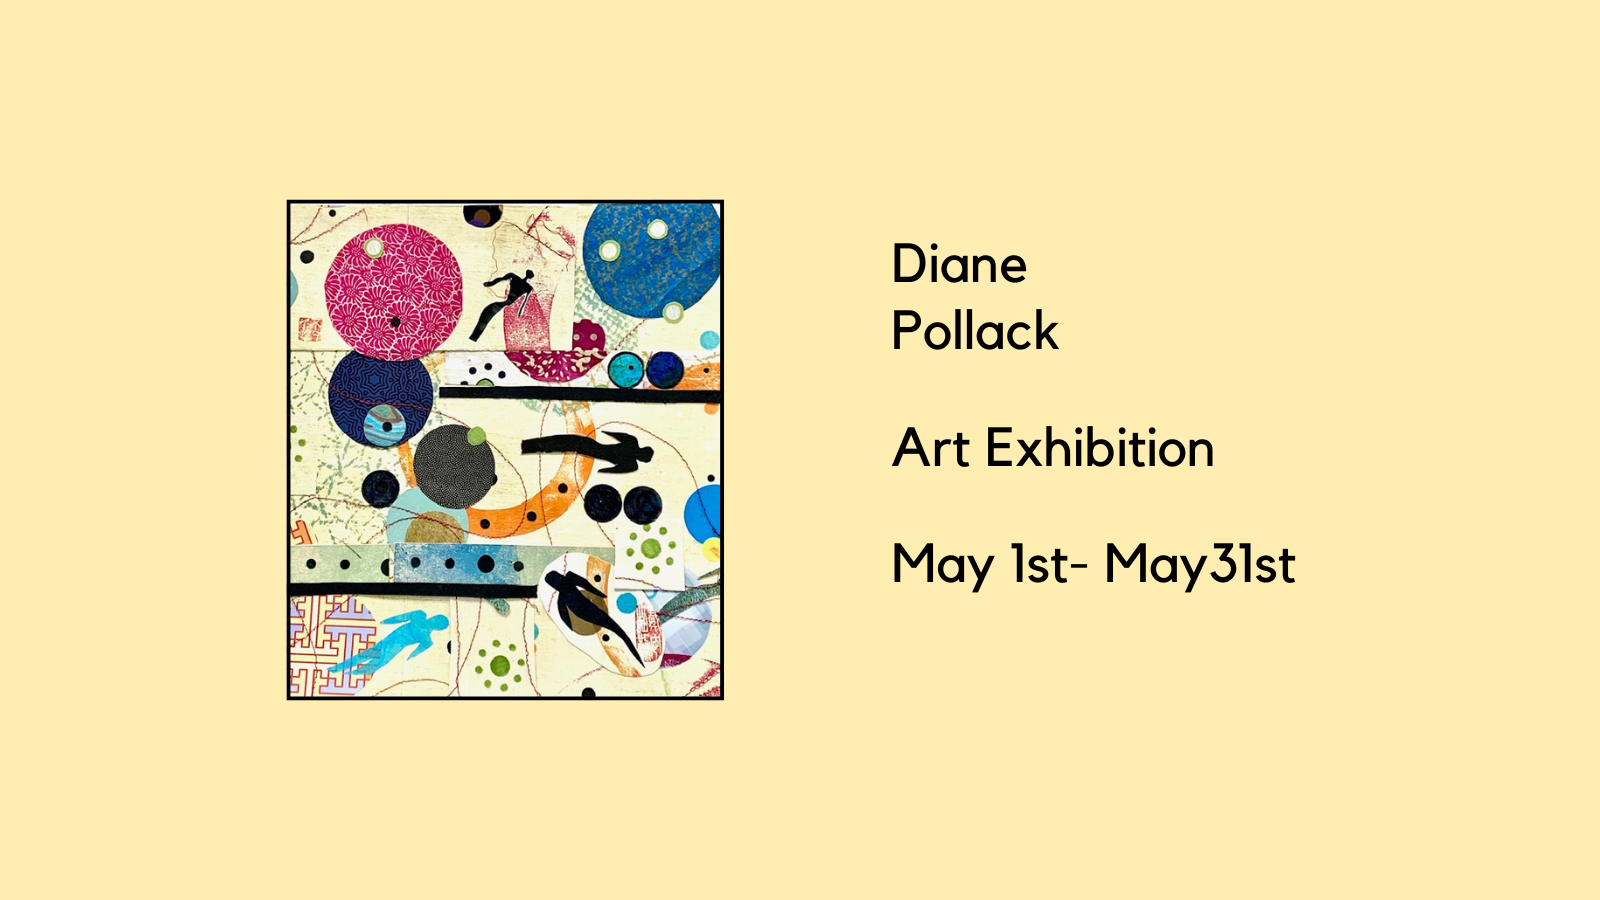 Copy of DIane Pollack show banner (1600 x 900 px) (2)